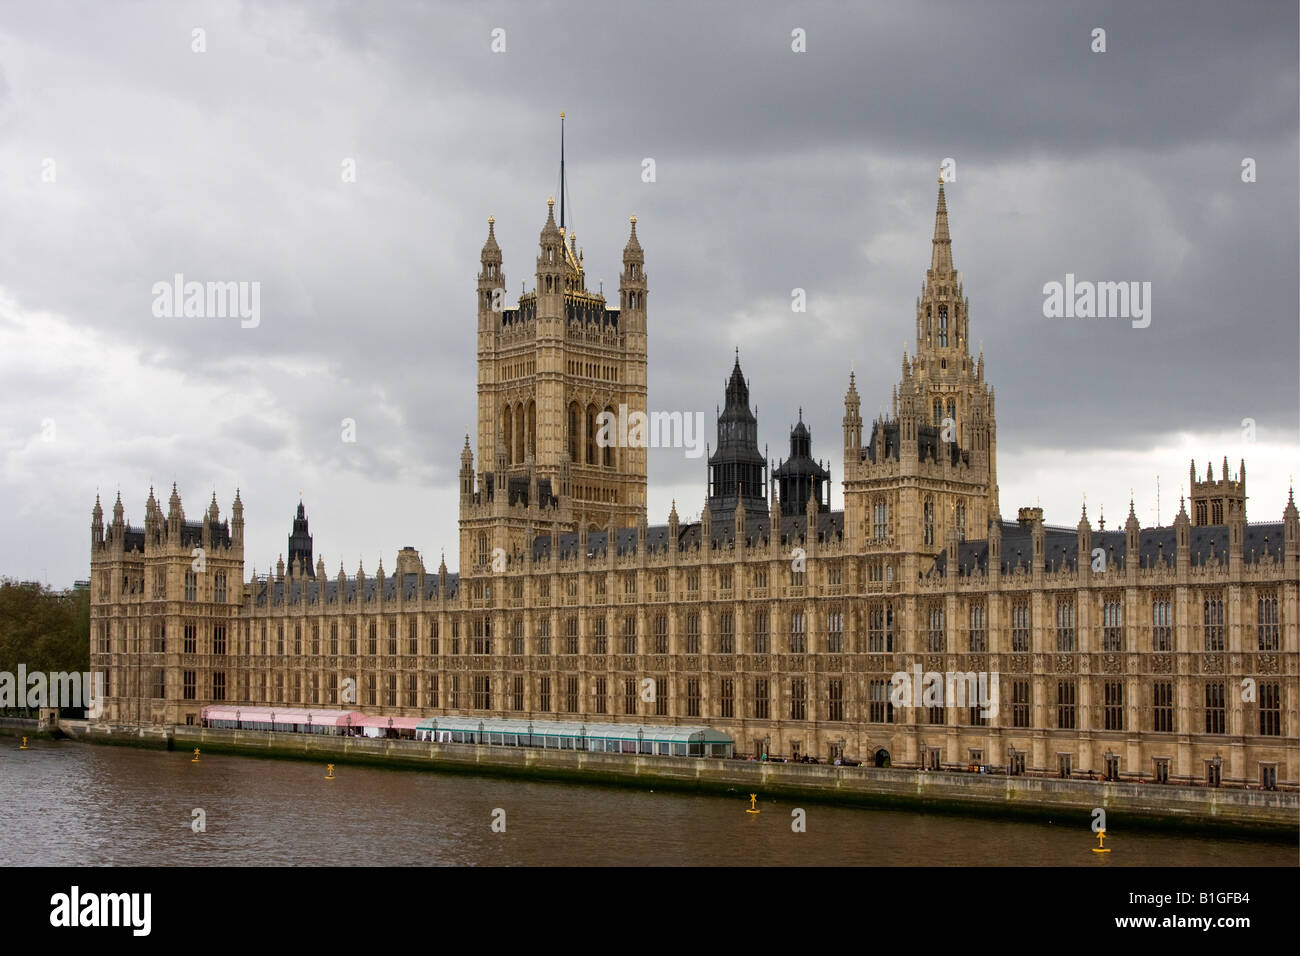 The British House of Parliament, on the Thames River in London, England Stock Photo